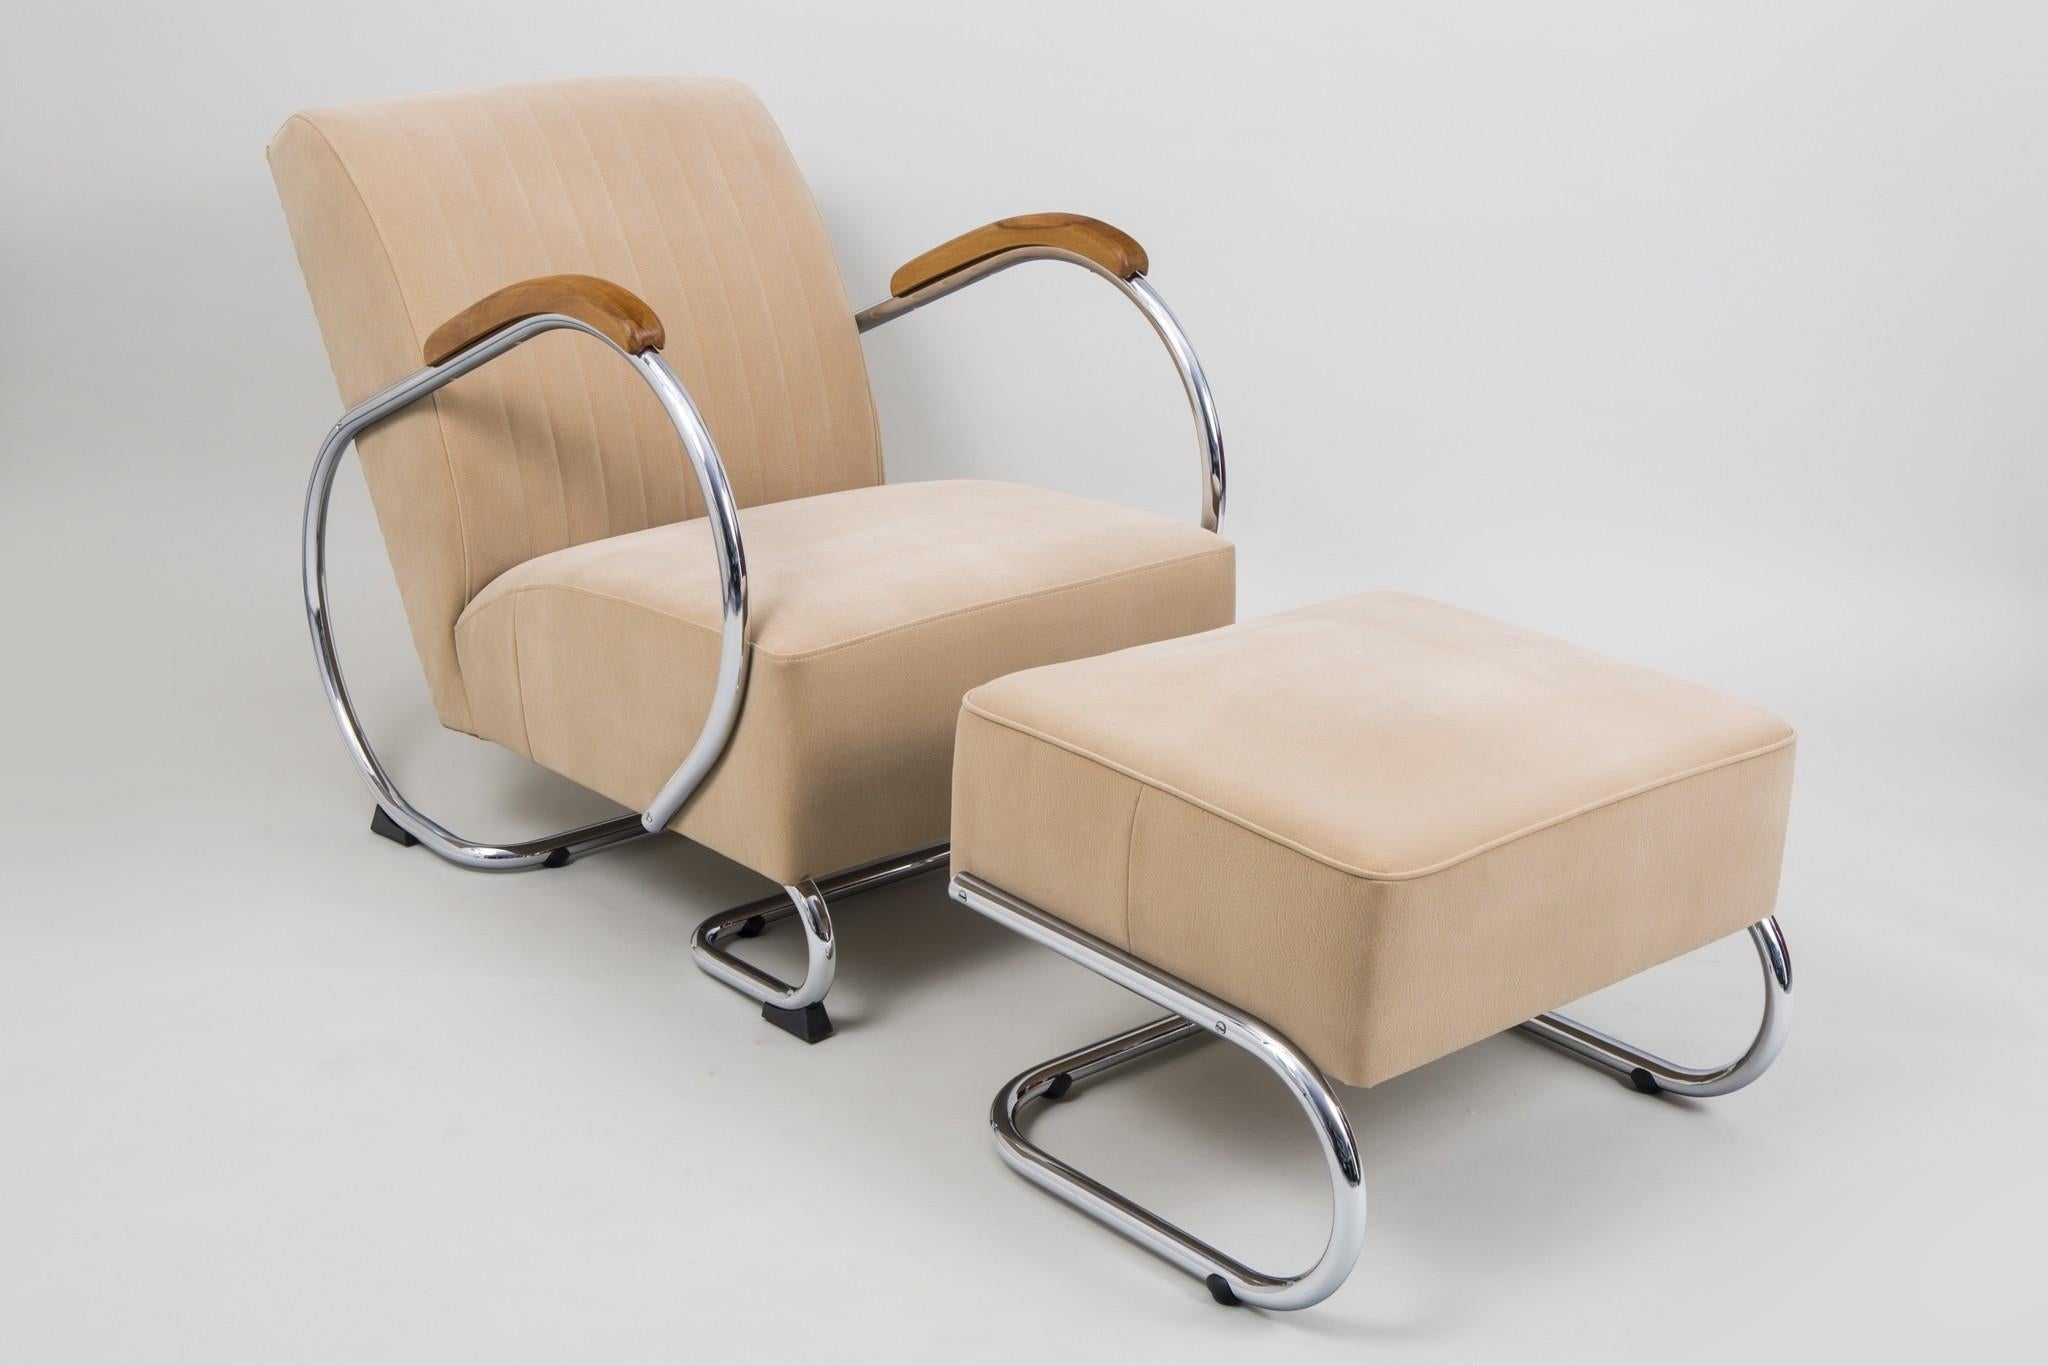 Fully Restored Chrome 1960s Seating Set Made by Kovona, in Czech Republic For Sale 2